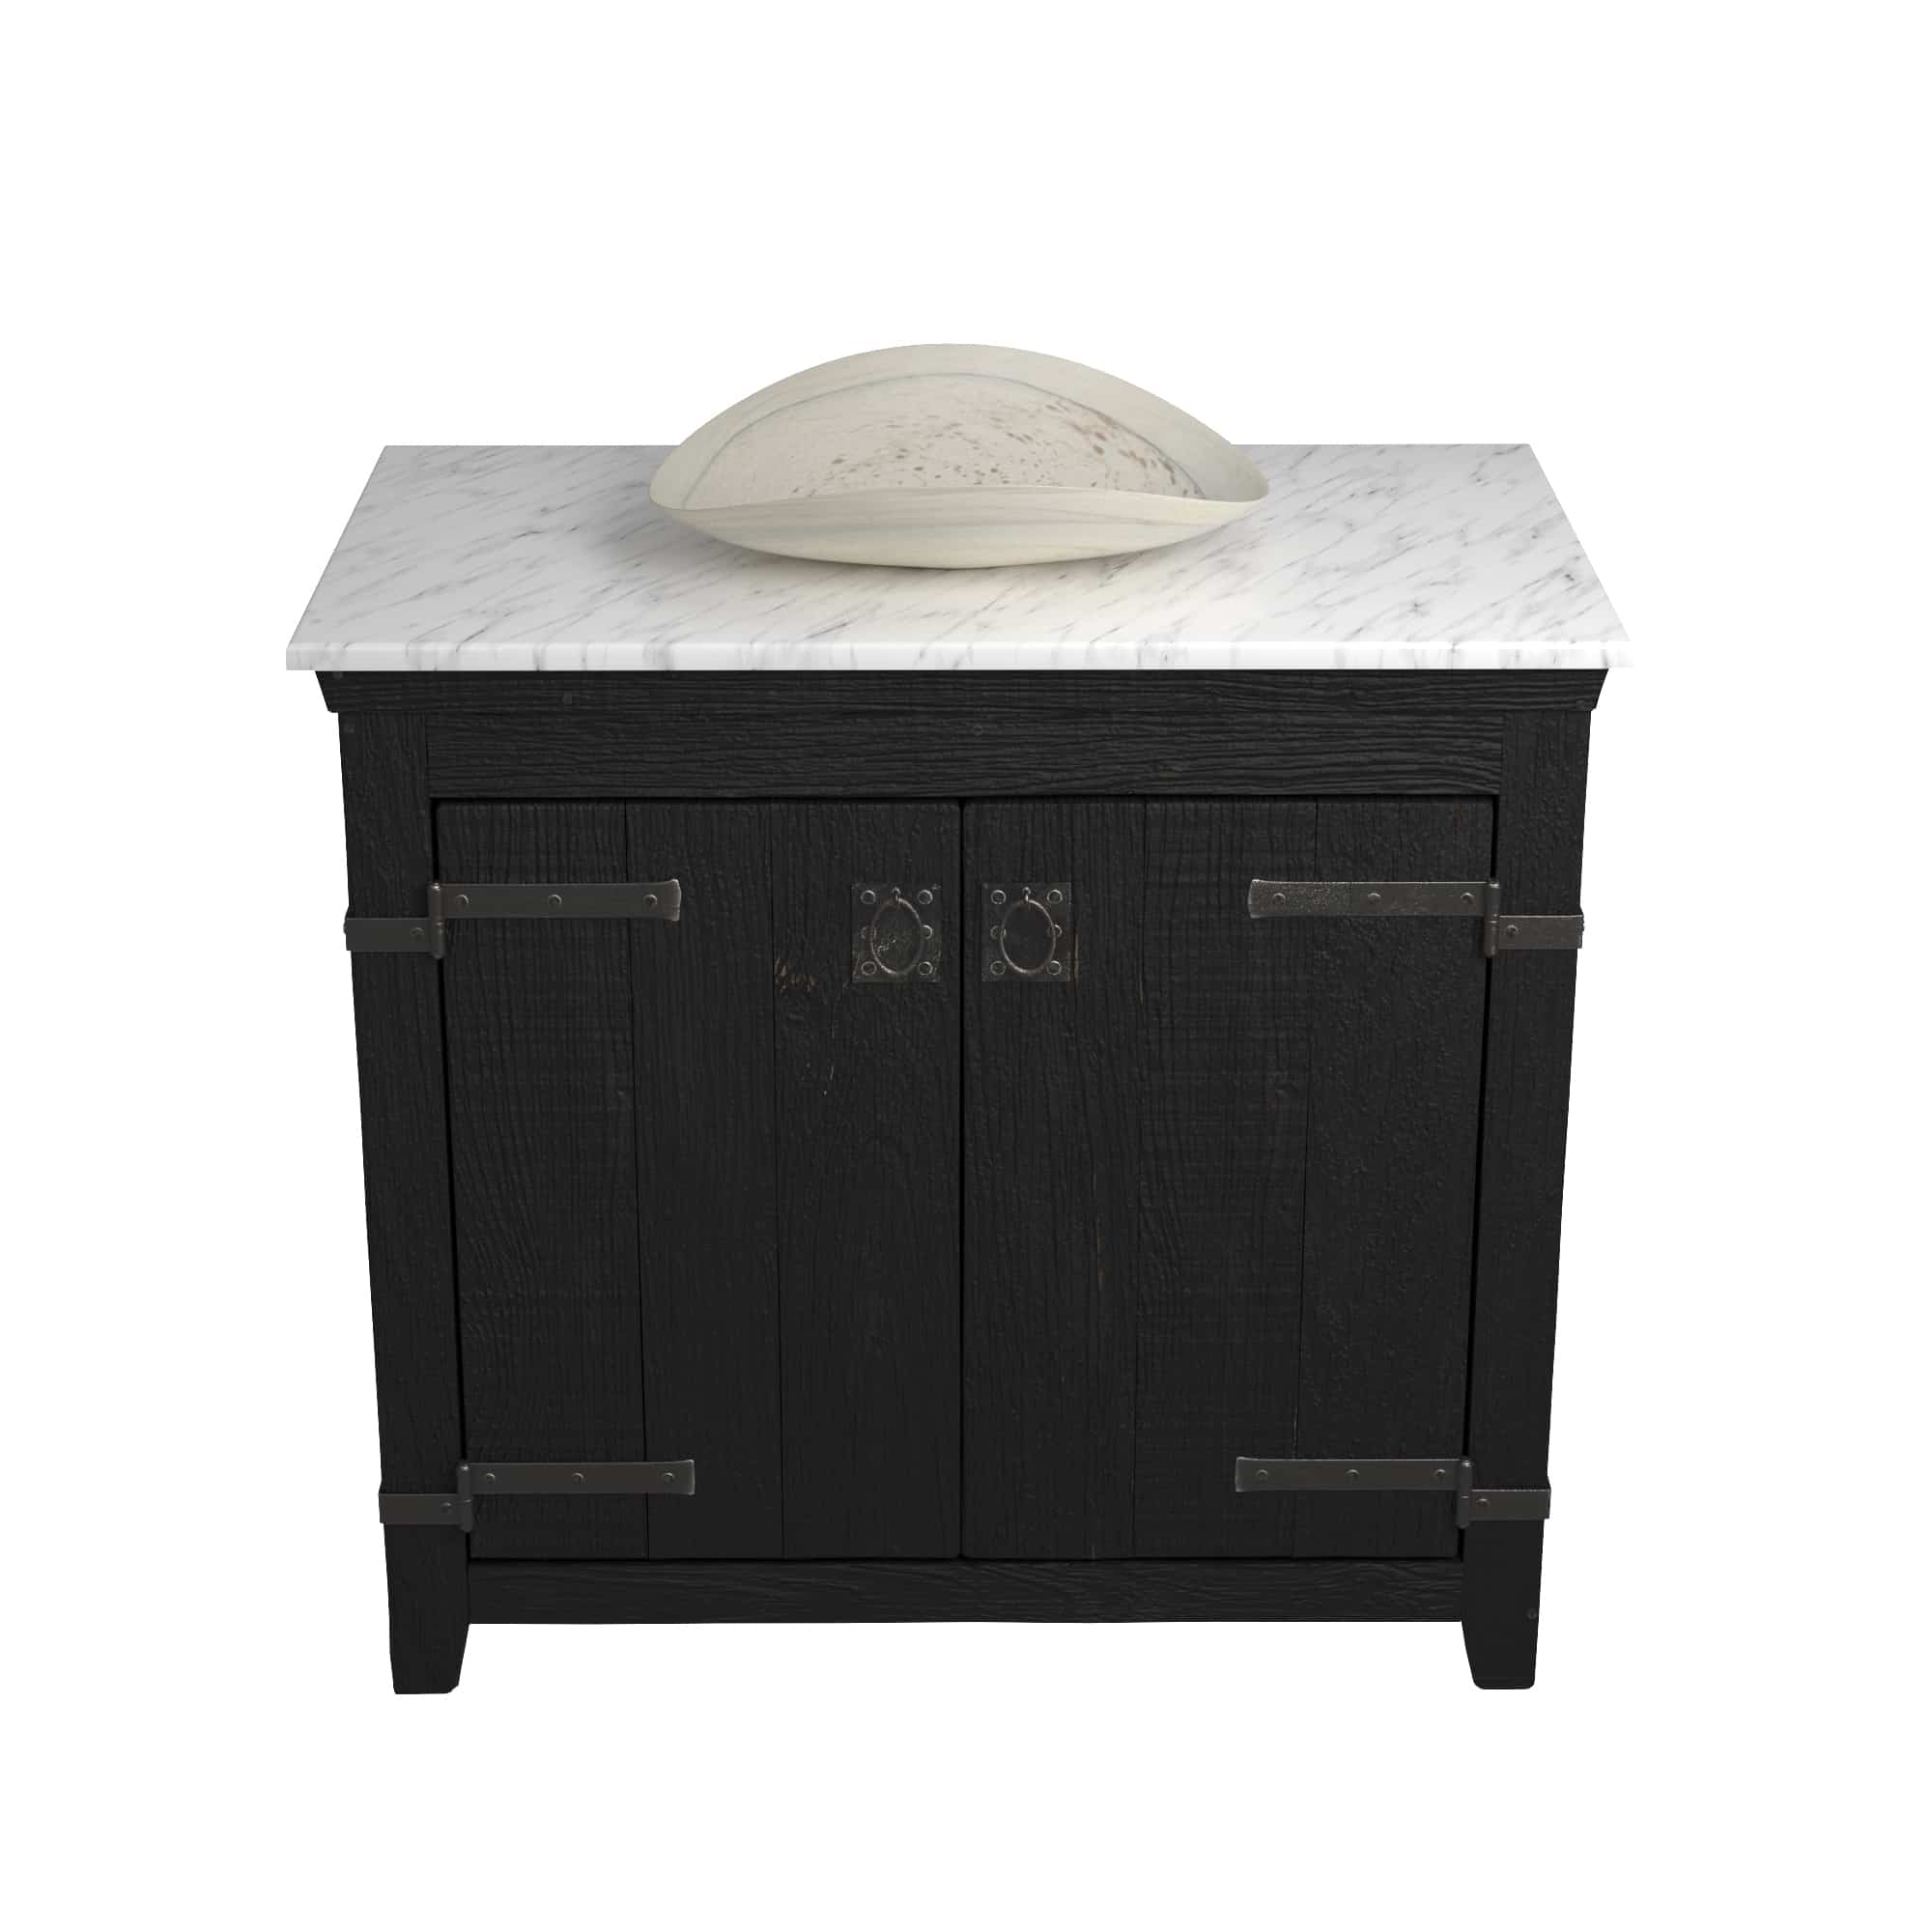 Native Trails 36" Americana Vanity in Anvil with Carrara Marble Top and Sorrento in Beachcomber, Single Faucet Hole, BND36-VB-CT-MG-109